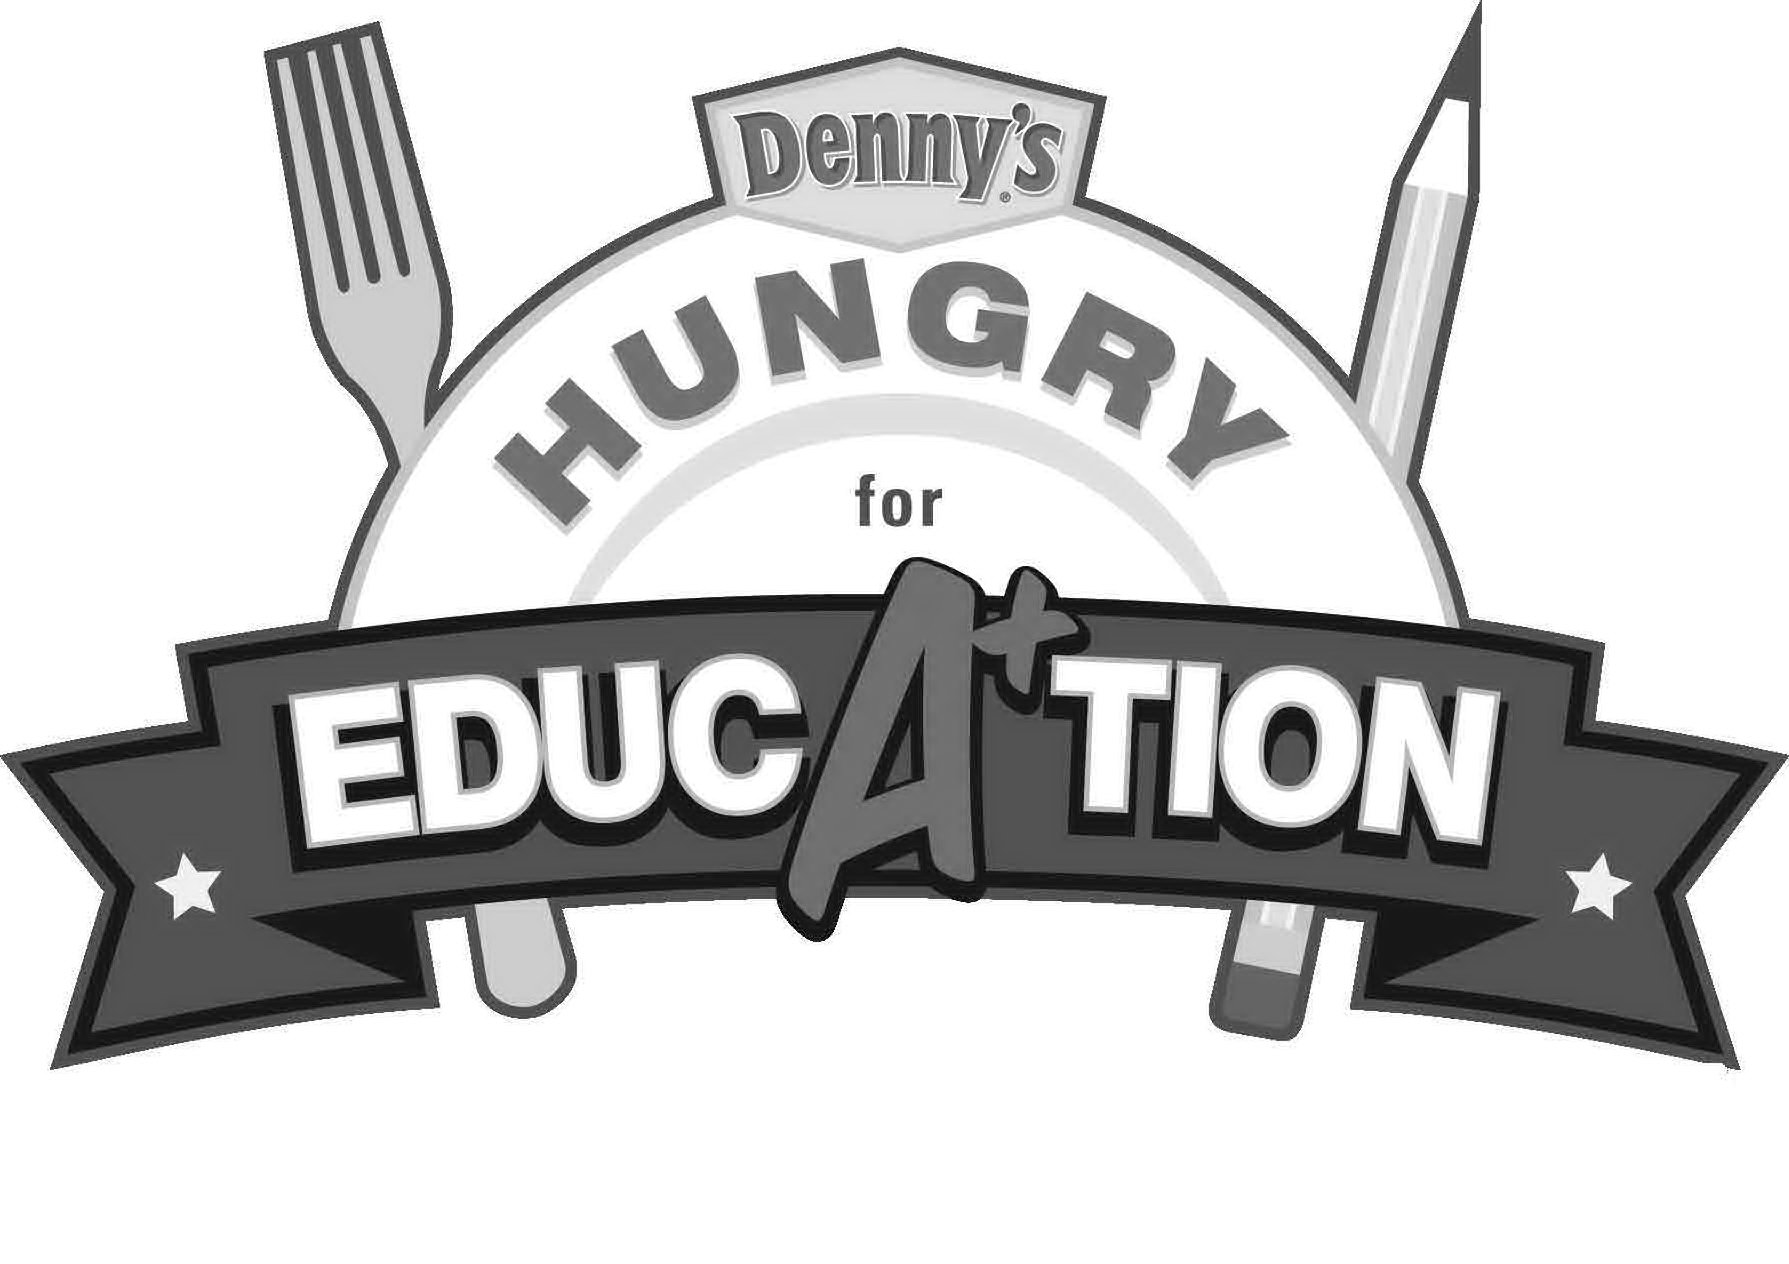  DENNY'S HUNGRY FOR EDUCA+TION